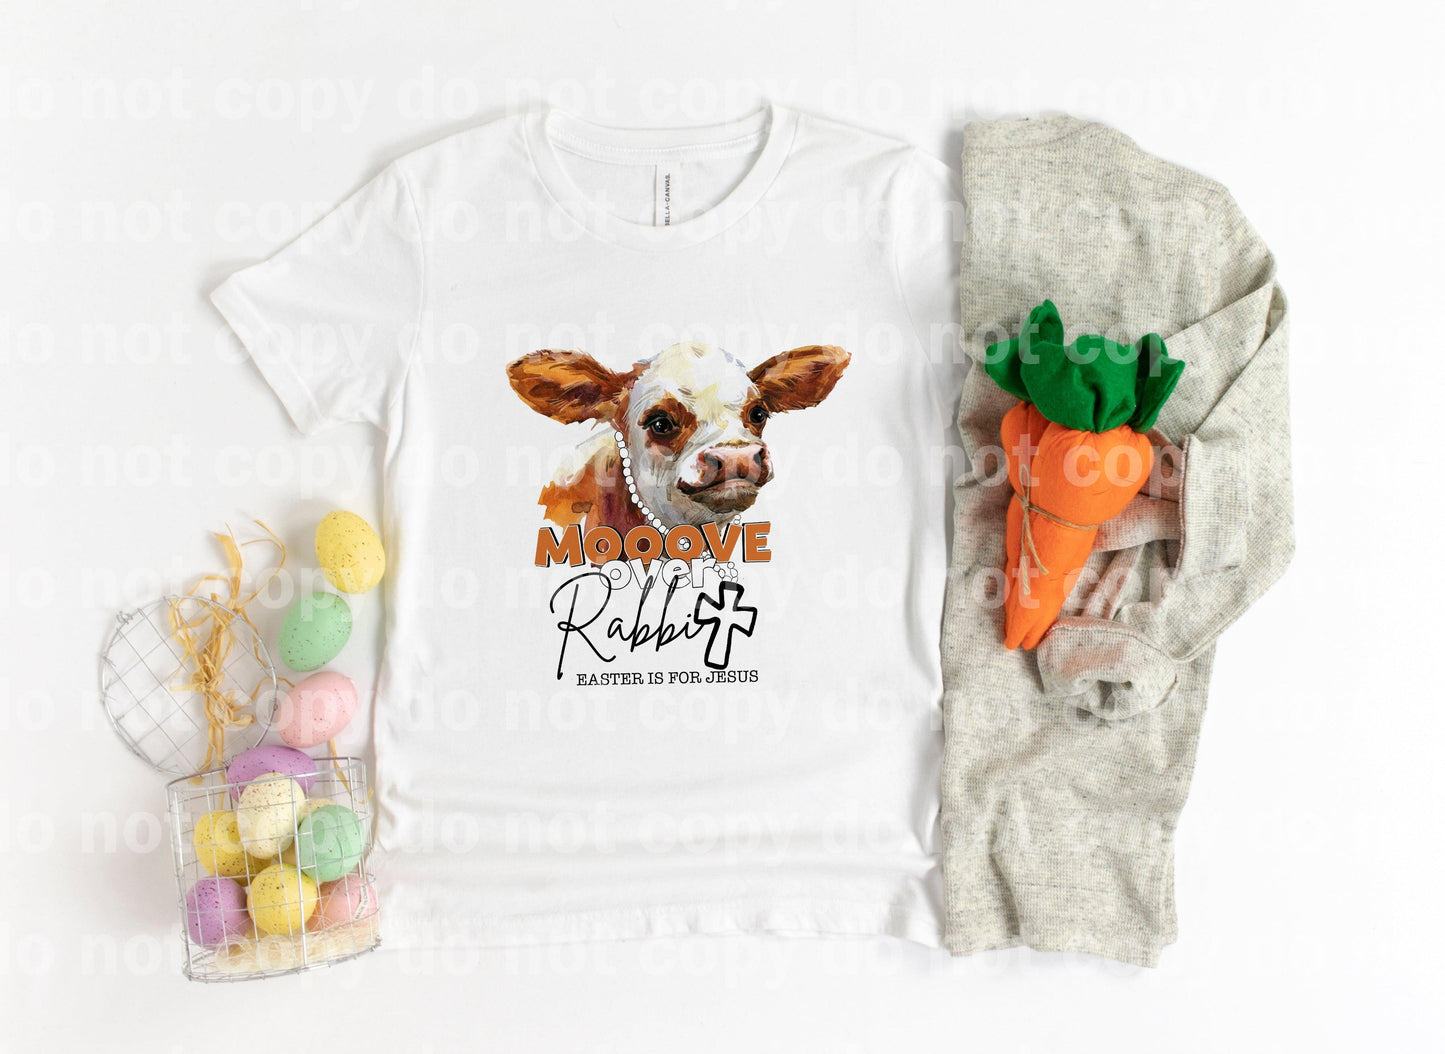 Mooove Over Rabbit Easter is for Jesus Sublimation print